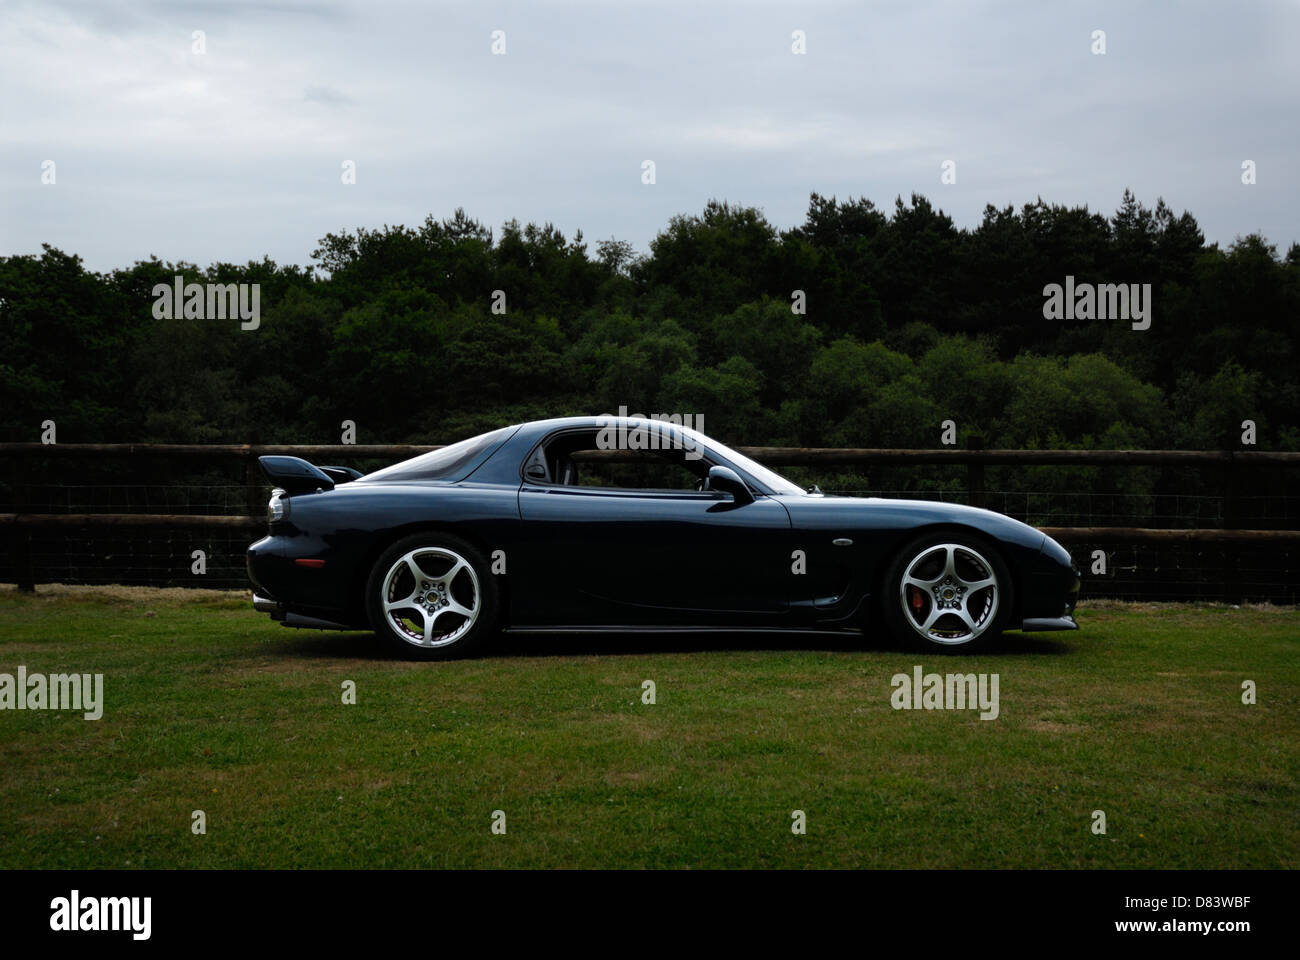 Mazda FD RX-7 sports car, Playboy's Car of the Year for 1993, 13B Wankel rotary engine. Stock Photo